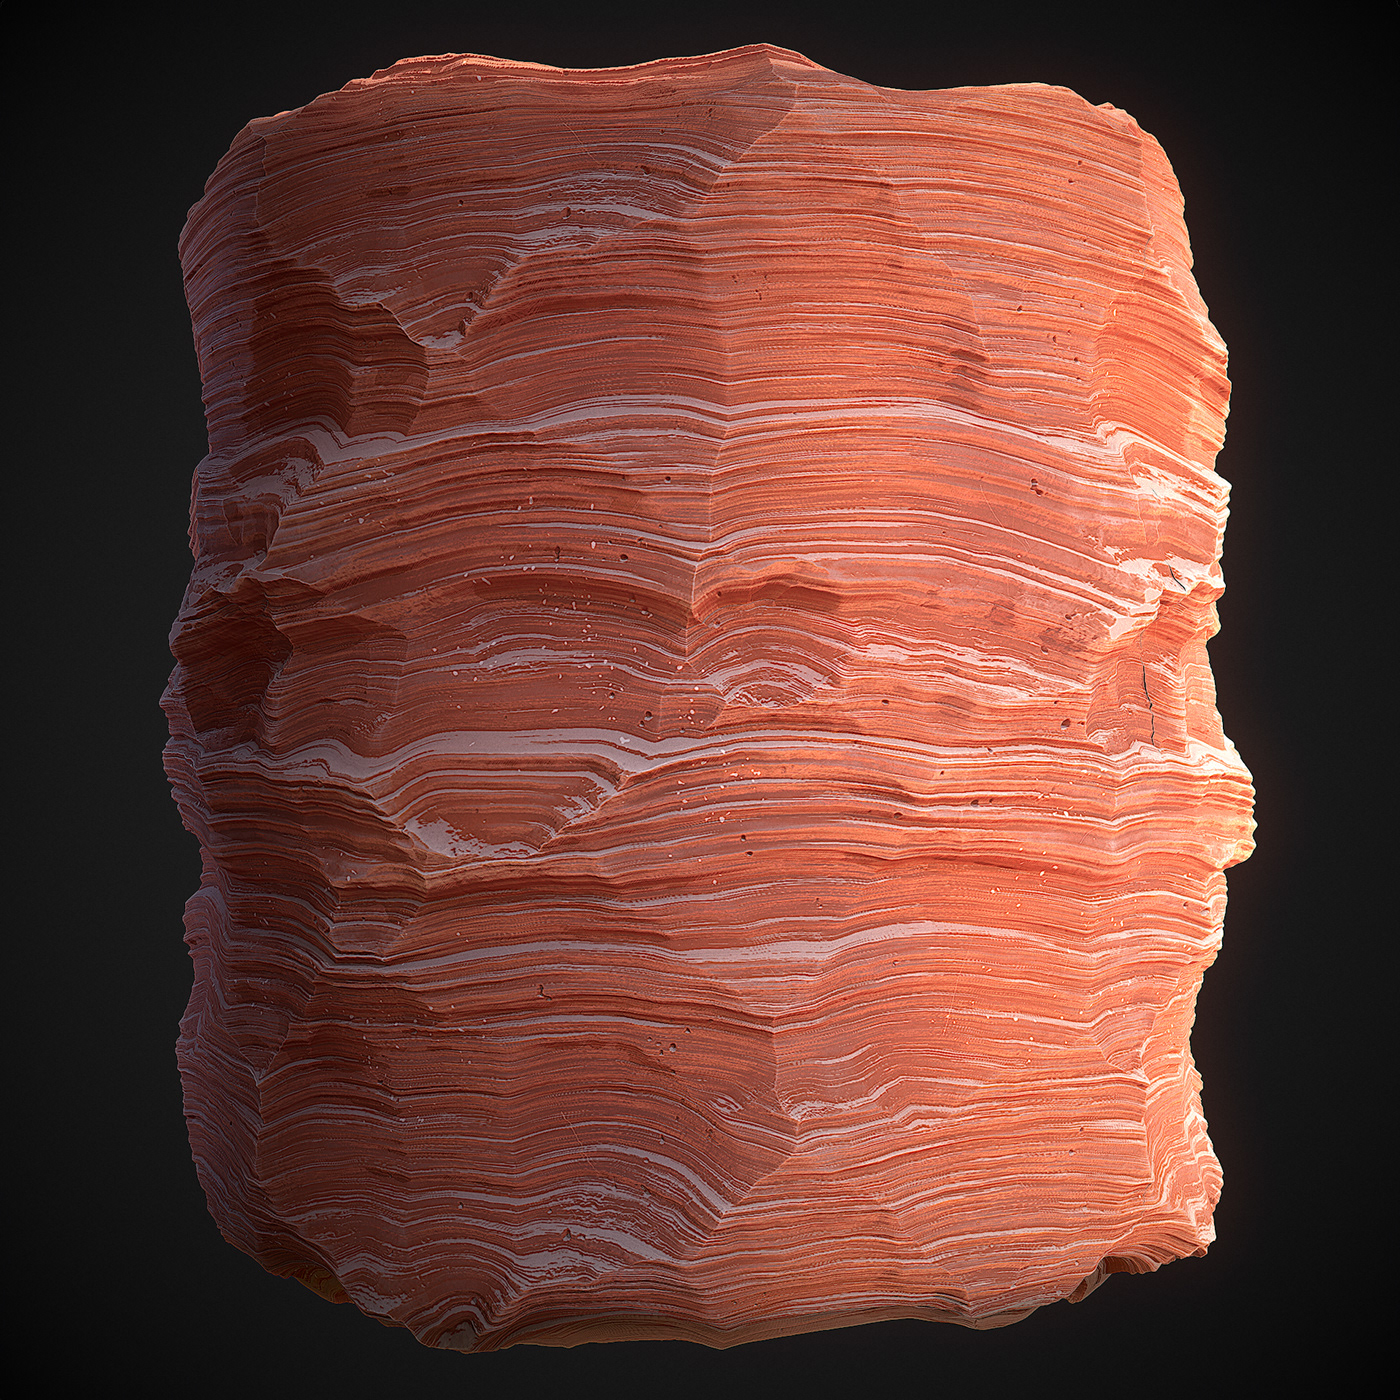 texture material 3D stylized sandstone Noai eroded